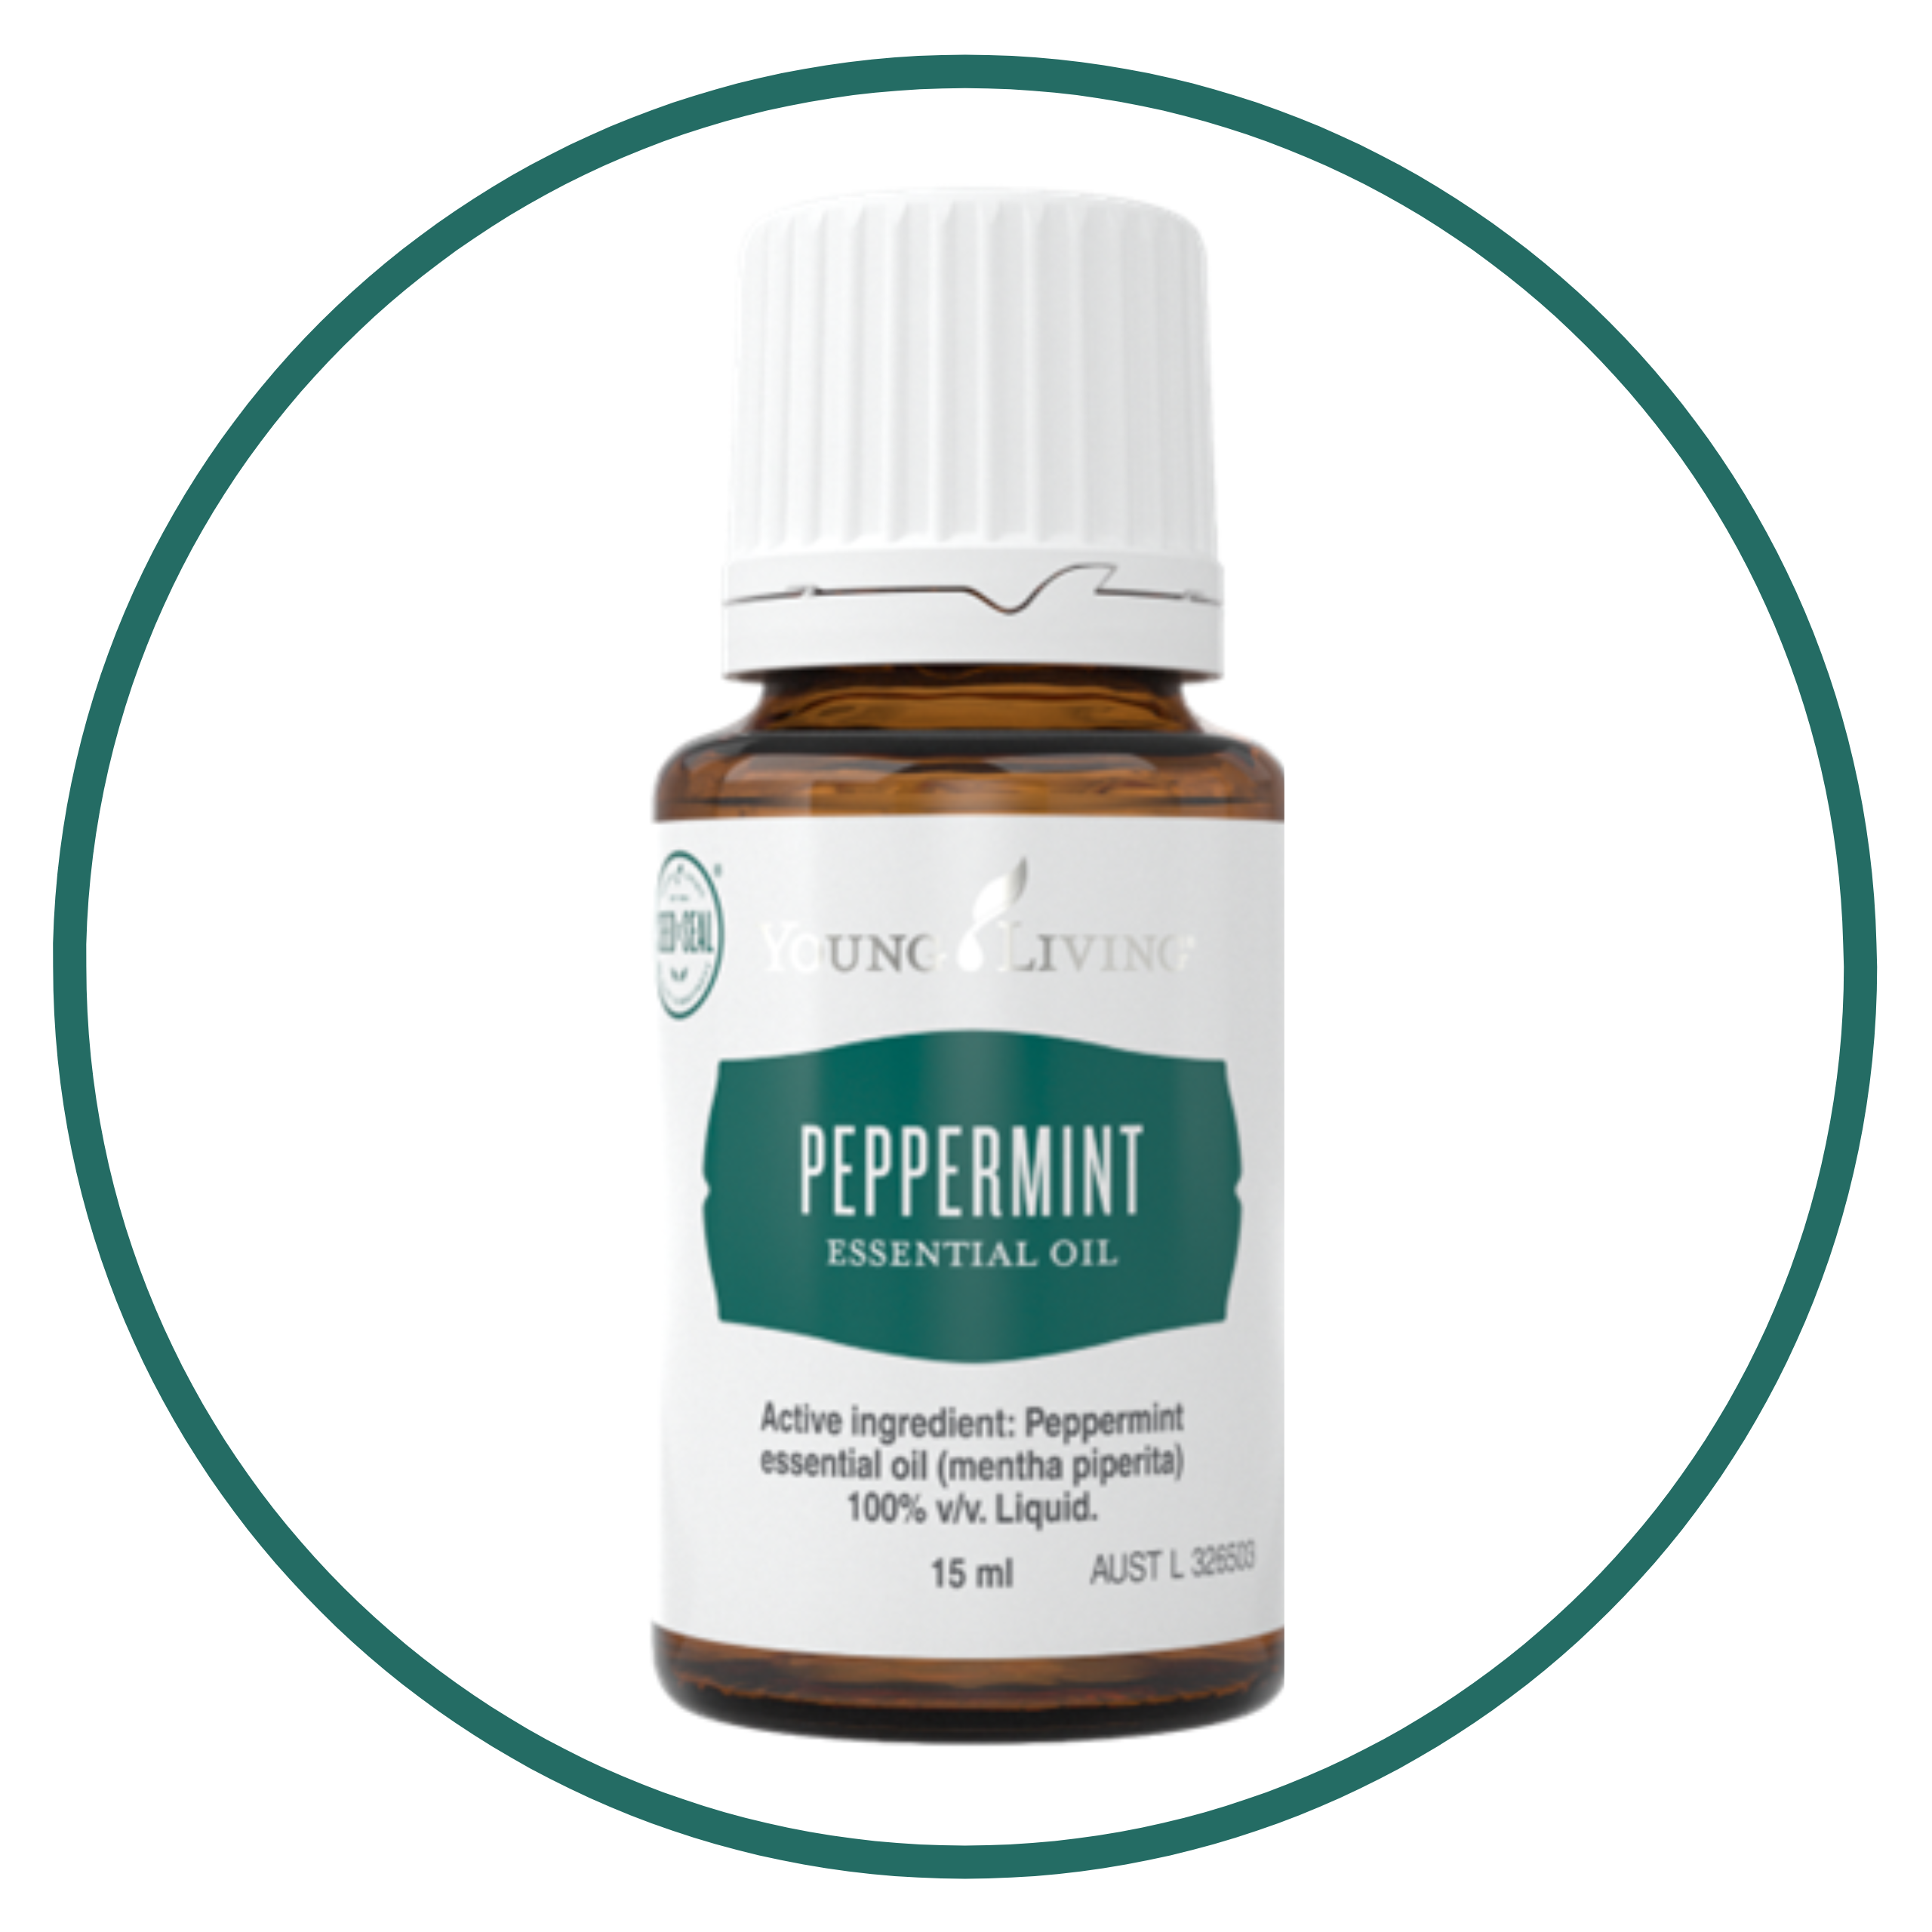 Image of Young Living 'peppermint' essential oil bottle